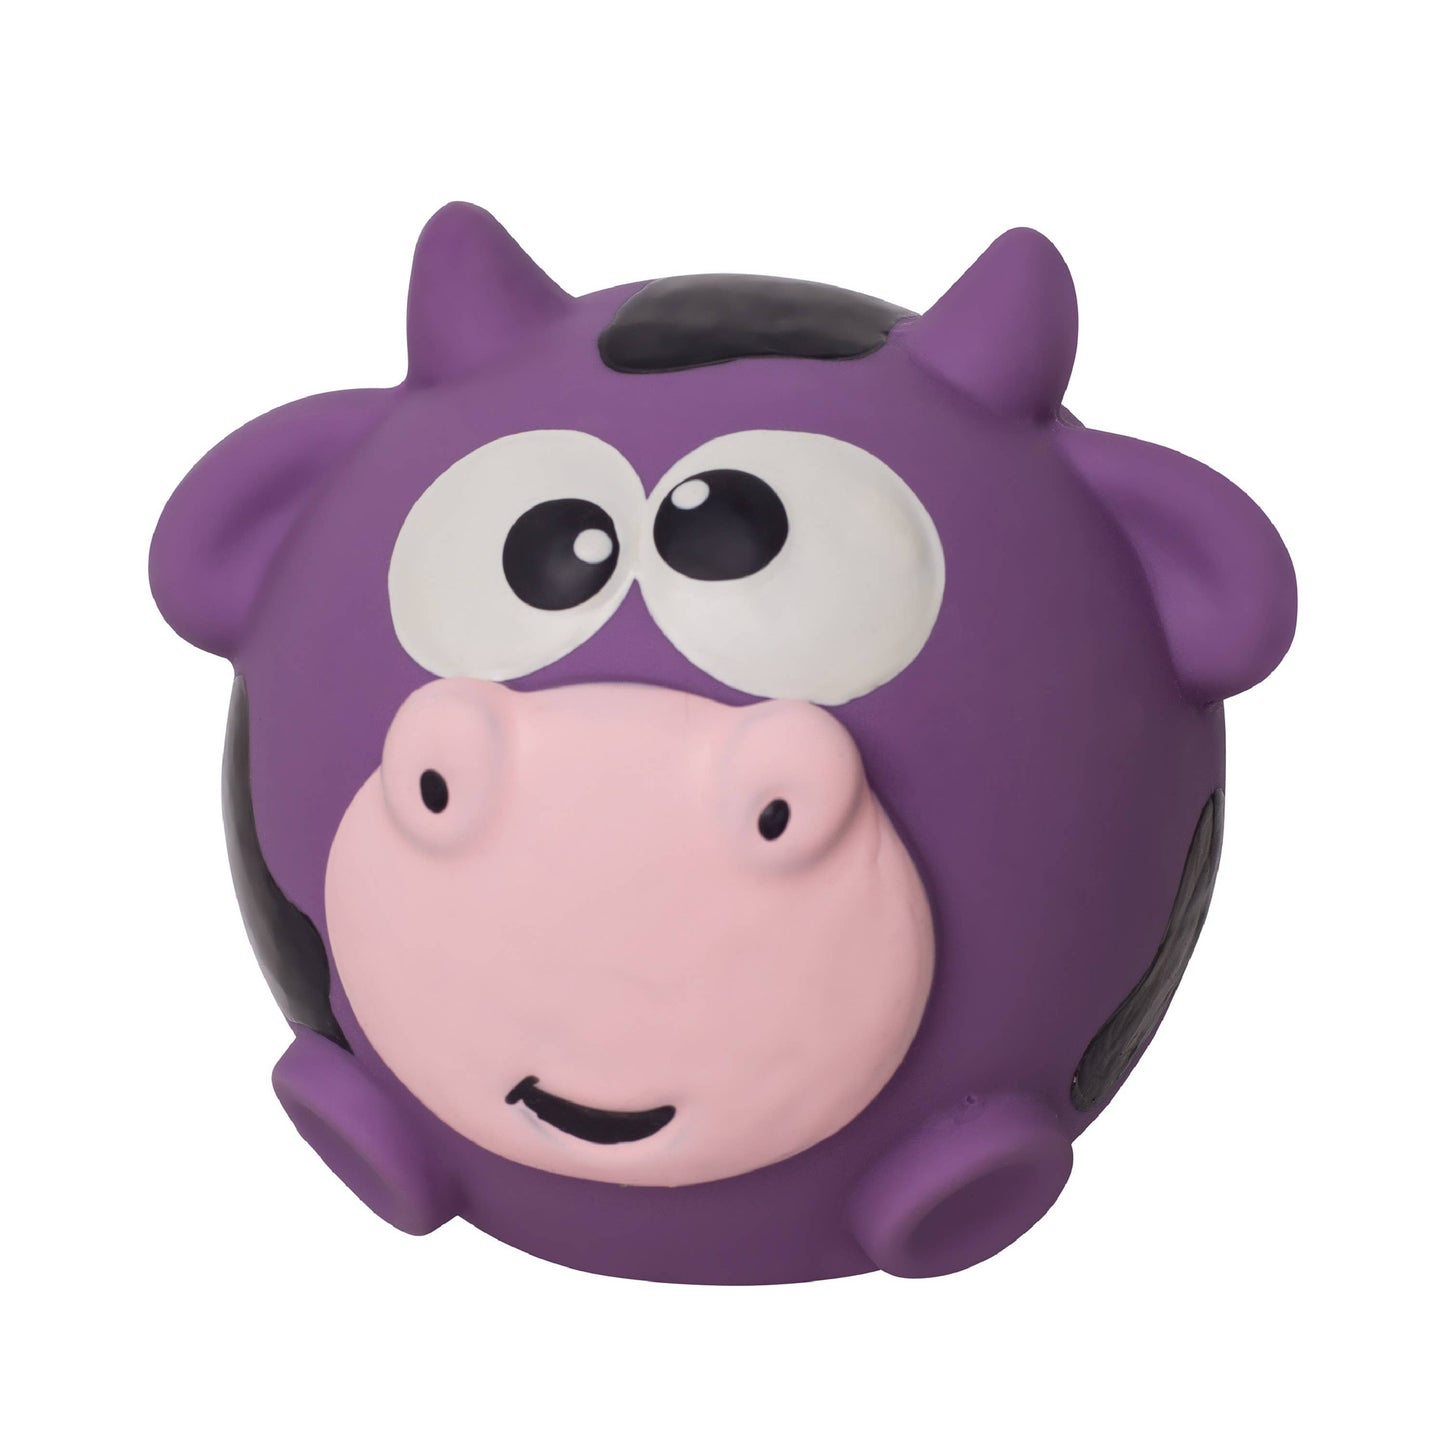 Outward Hound Sillyz Cow Latex Squeaky Ball Toy Purple